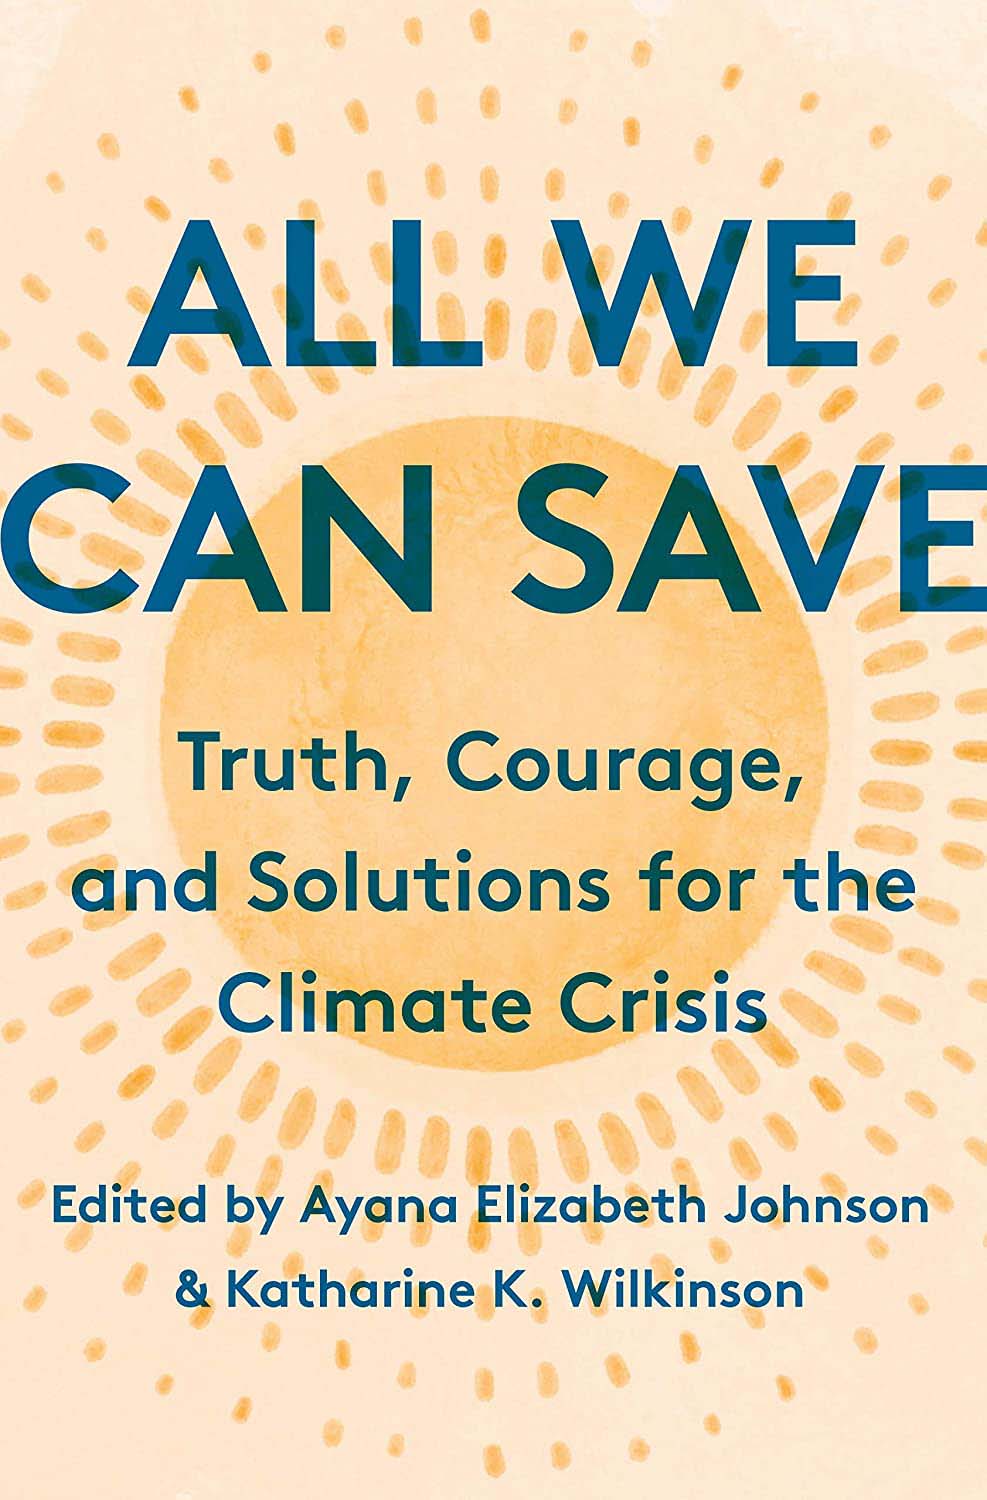 All We Can Save: Truth, Courage, and Solutions for the Climate Crises, edited by Ayana Elizabeth Johnson and Katharine K. Wilkinson. (One World)